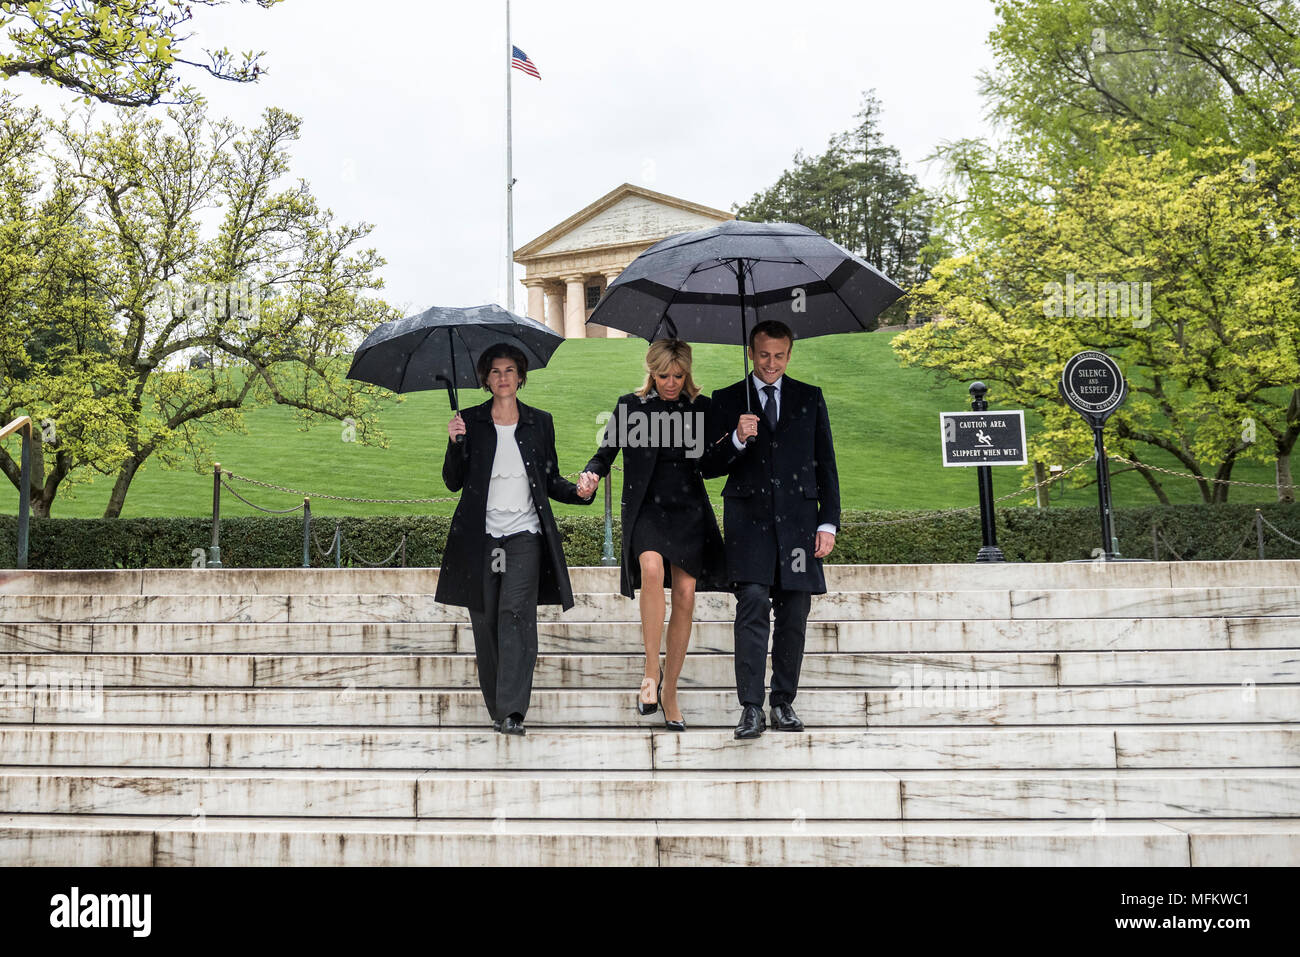 French President Emmanuel Macron (right), his wife, Brigitte Macron (center), and Katharine Kelley (left), superintendent, Arlington National Cemetery, visit the gravesites of former President John F. Kennedy and Jacqueline Bouvier Kennedy Onassis at Arlington National Cemetery, Arlington, Virginia, April 24, 2018.  Macron’s visit to Arlington National Cemetery was part of the first official State Visit from France since President Francois Hollande came to Washington in 2014. President Macron also laid a wreath at the Tomb of the Unknown Soldier as part of his visit. (U.S. Army photo by Elizab Stock Photo